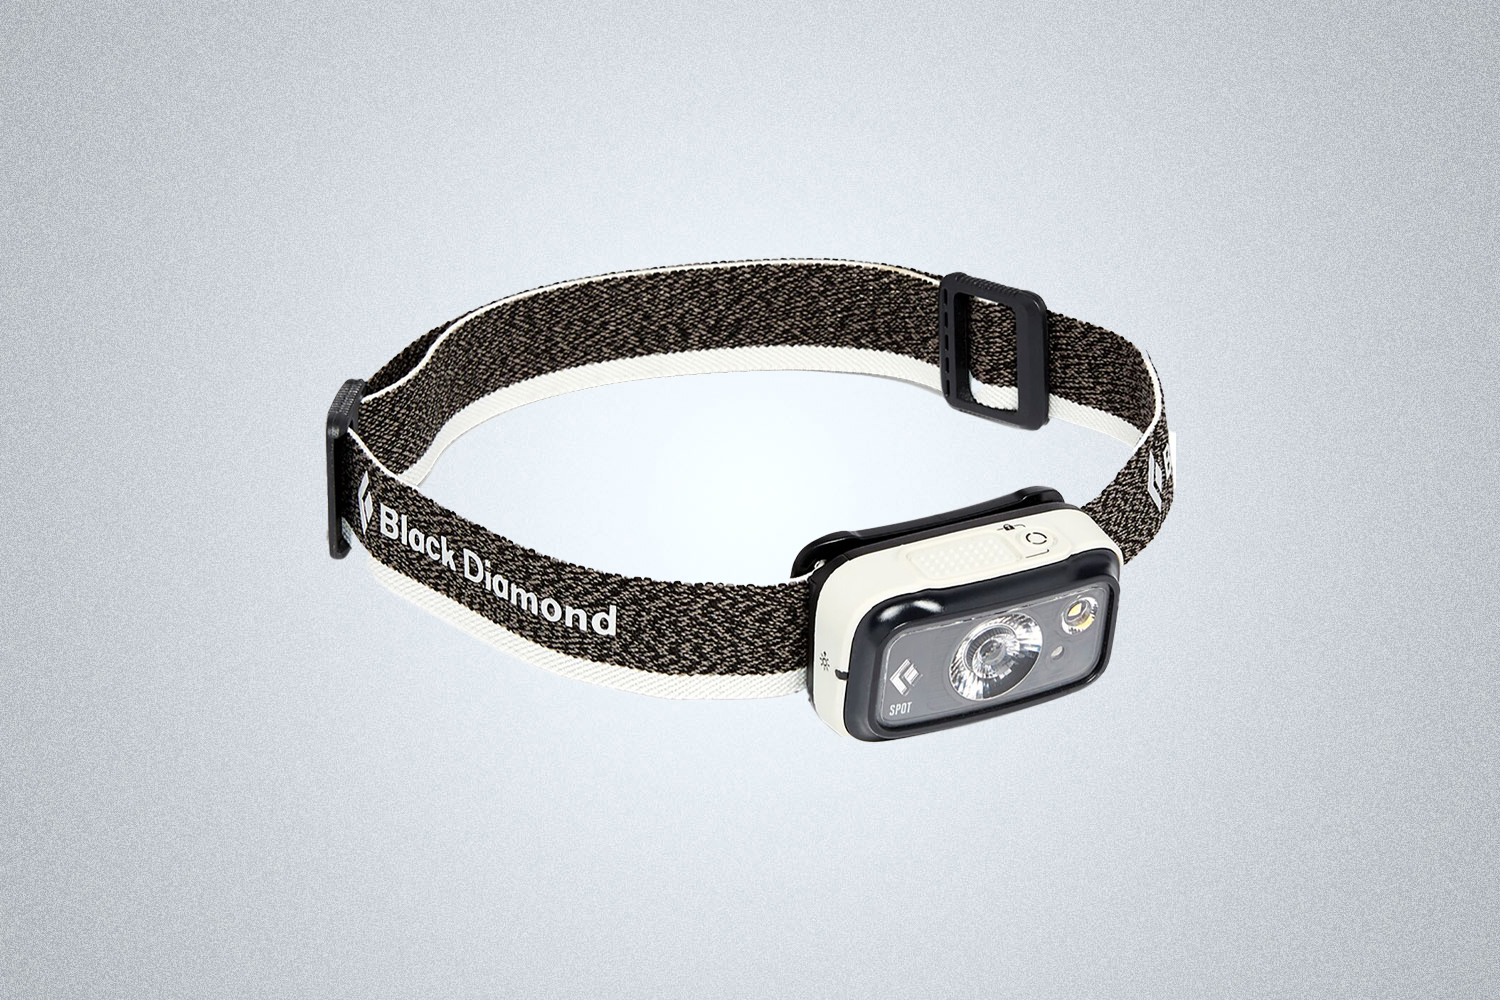 The Black Diamond Spot 350 Headlamp in black and white from the Backcountry Memorial Day Sale event